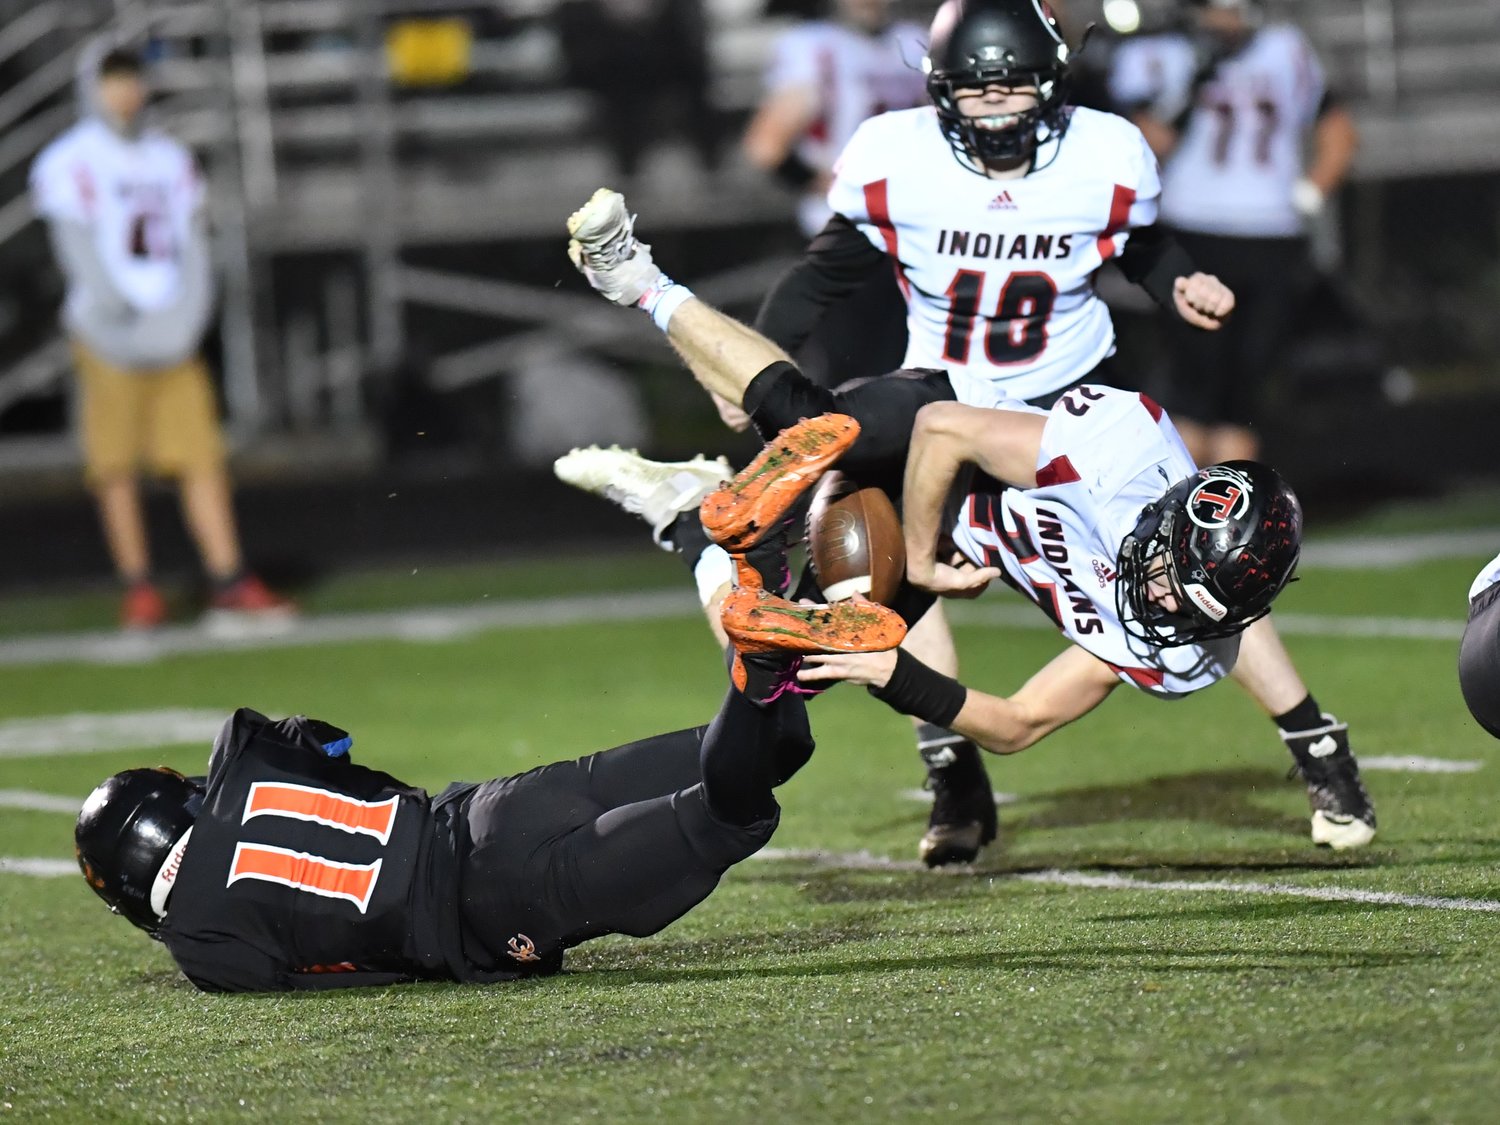 Toledo running back Geoffrey Glass (22) gets airborne while rushing against Kalama in the 2B state quarterfinals Nov. 20.